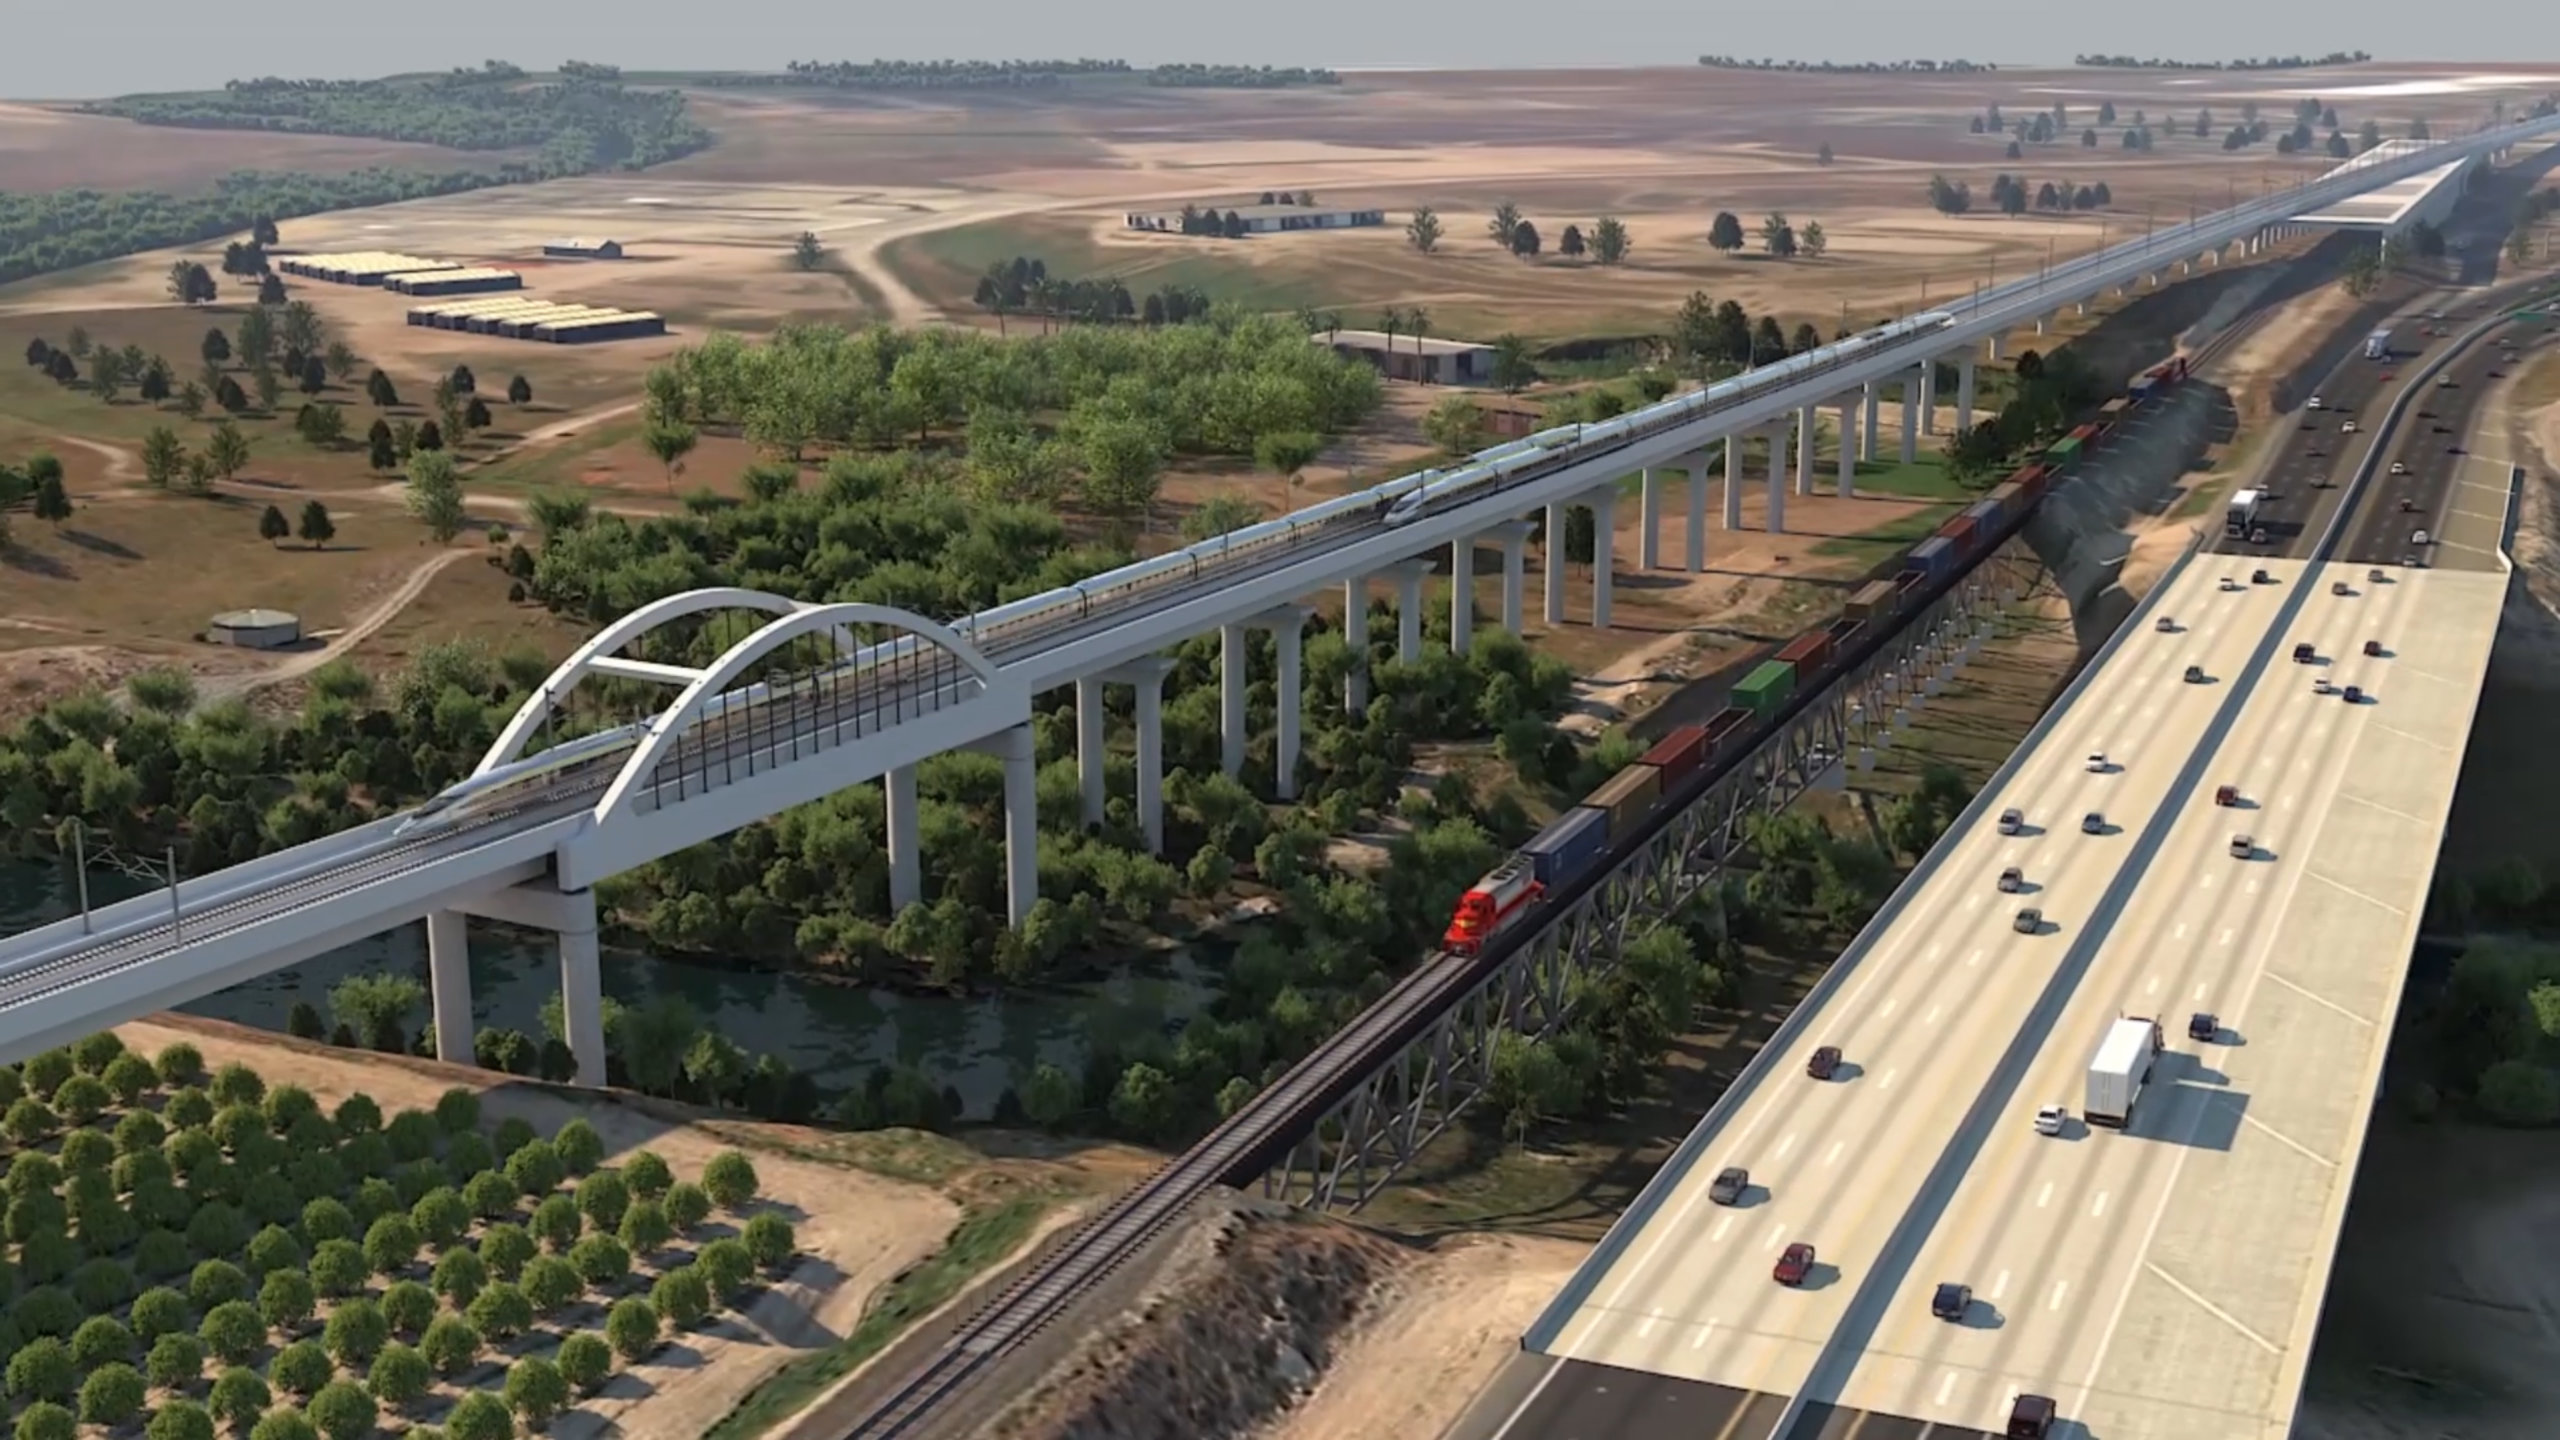 Rendering of the signature arches of the San Joaquin River Viaduct north of the city of Fresno.